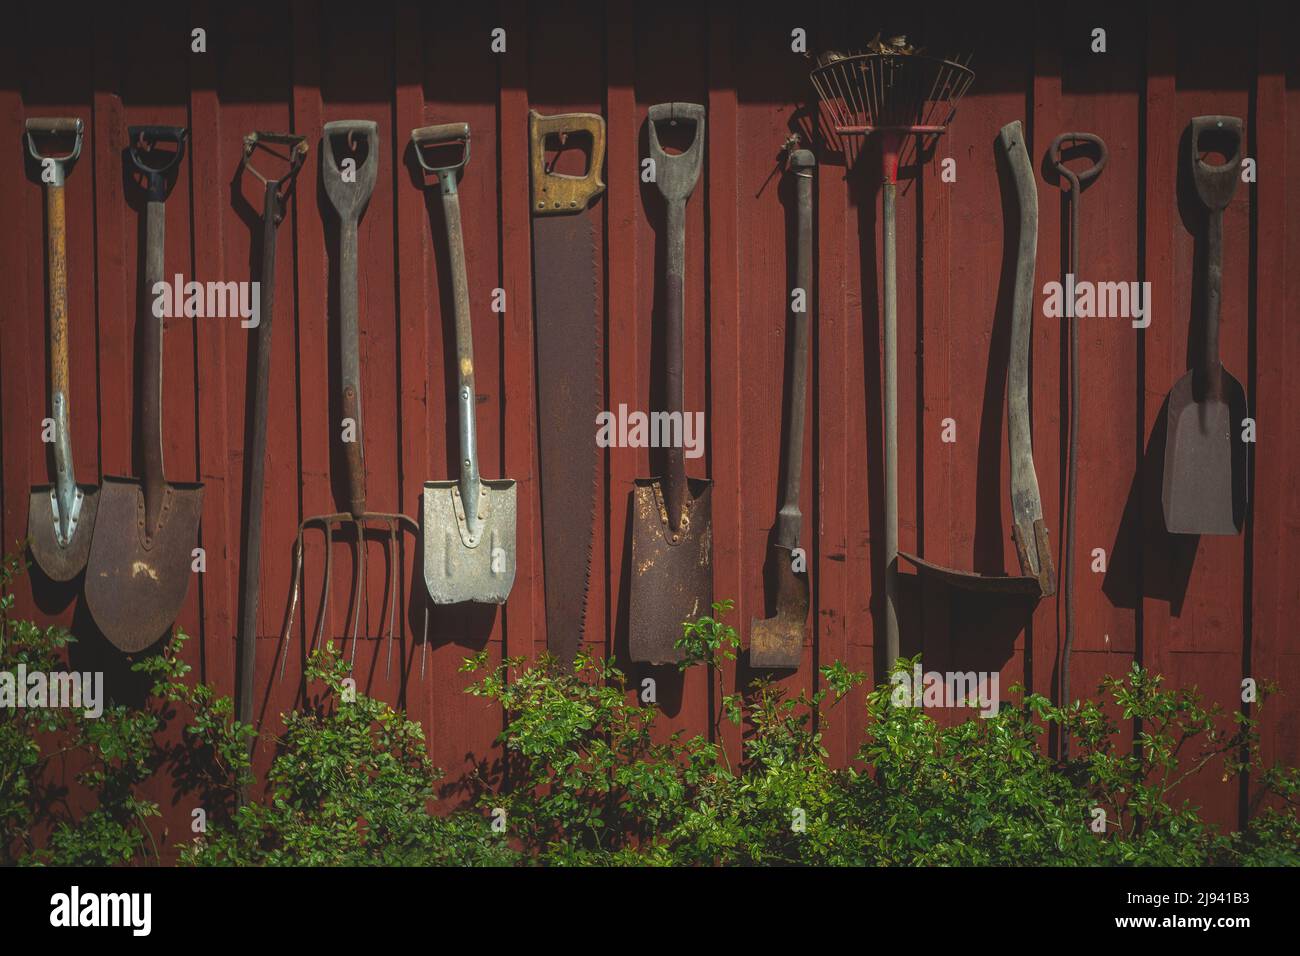 Antique gardening tools in the tourist town of Sigtuna hang on the wall of a red wooden house Stock Photo